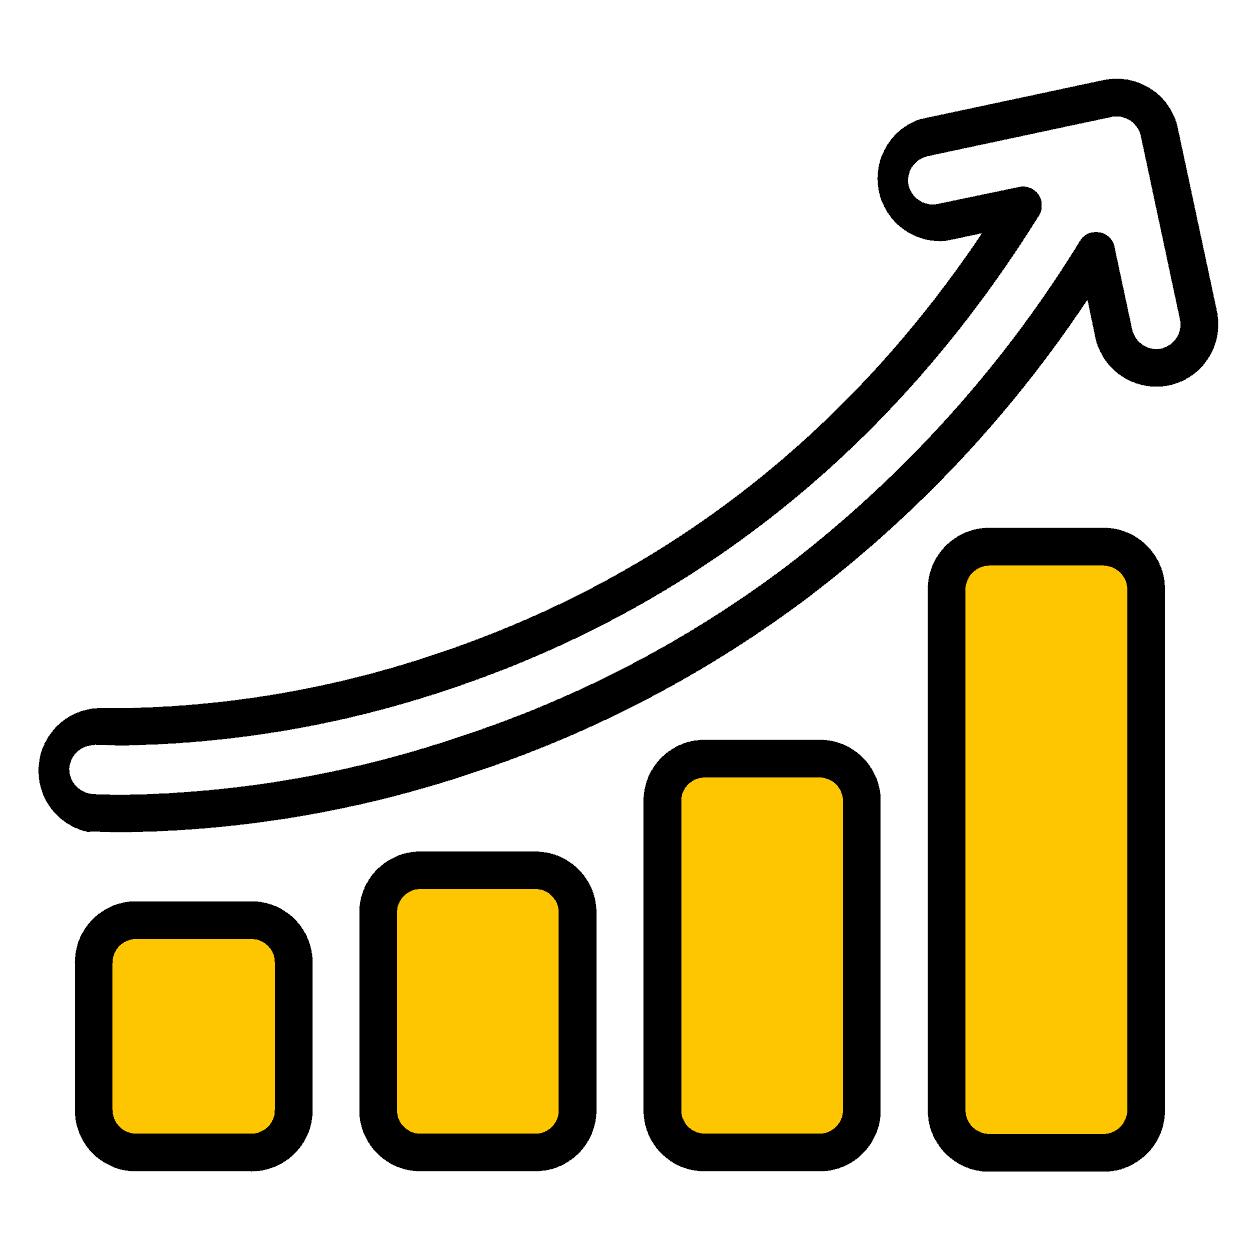 A graphic of a bar graph with an arrow indicating growth with yellow highlights.